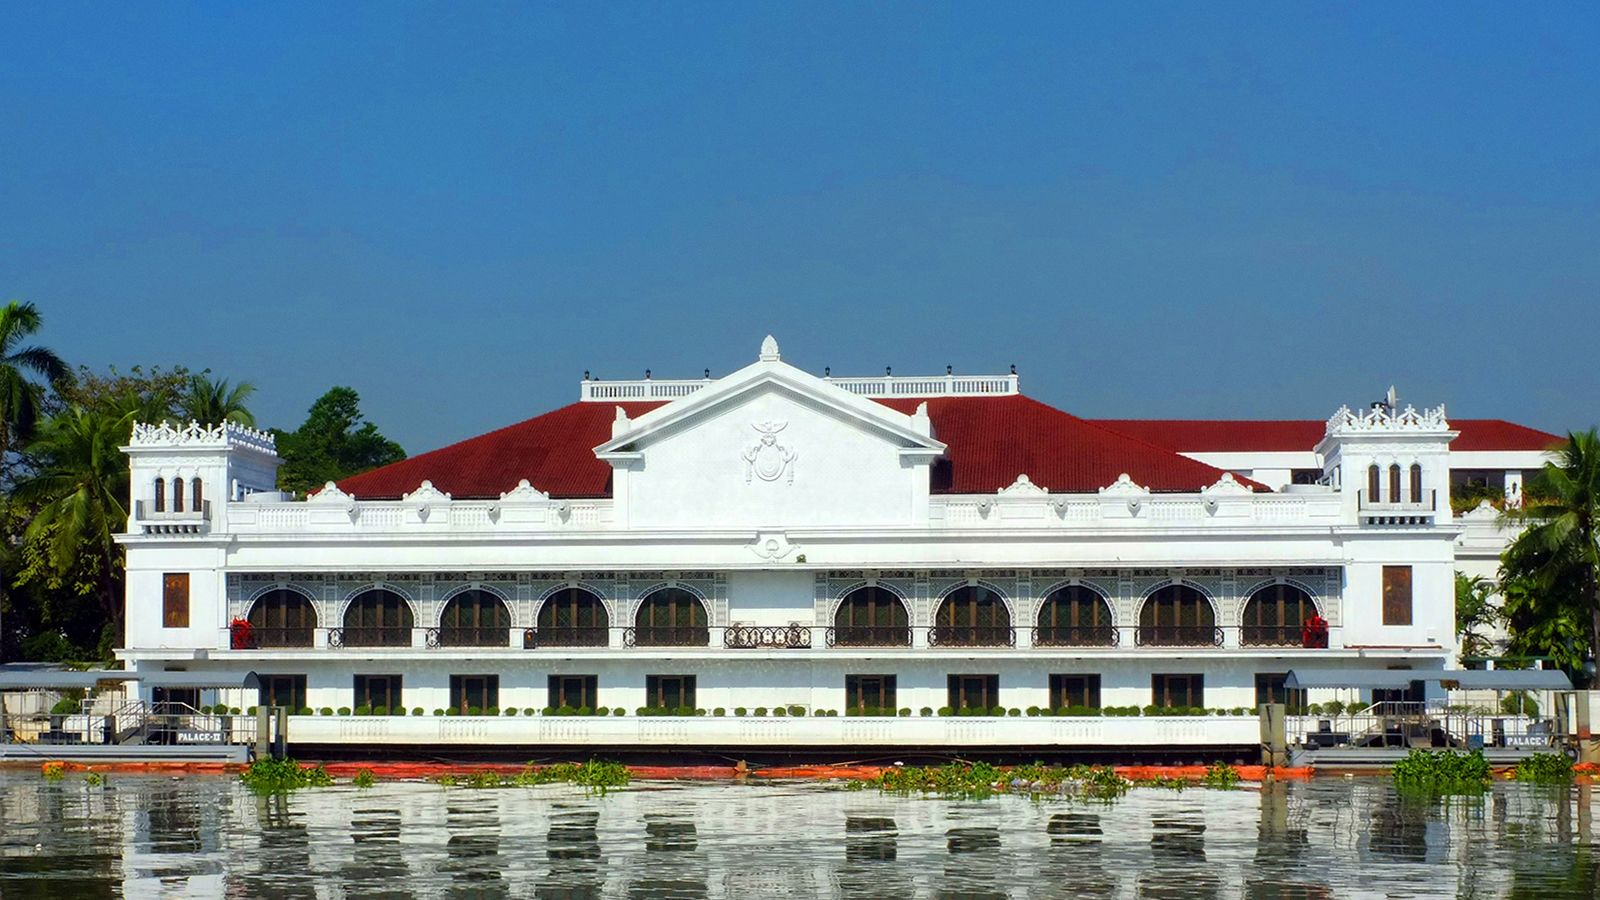 Malacanang Palace in the Philippines